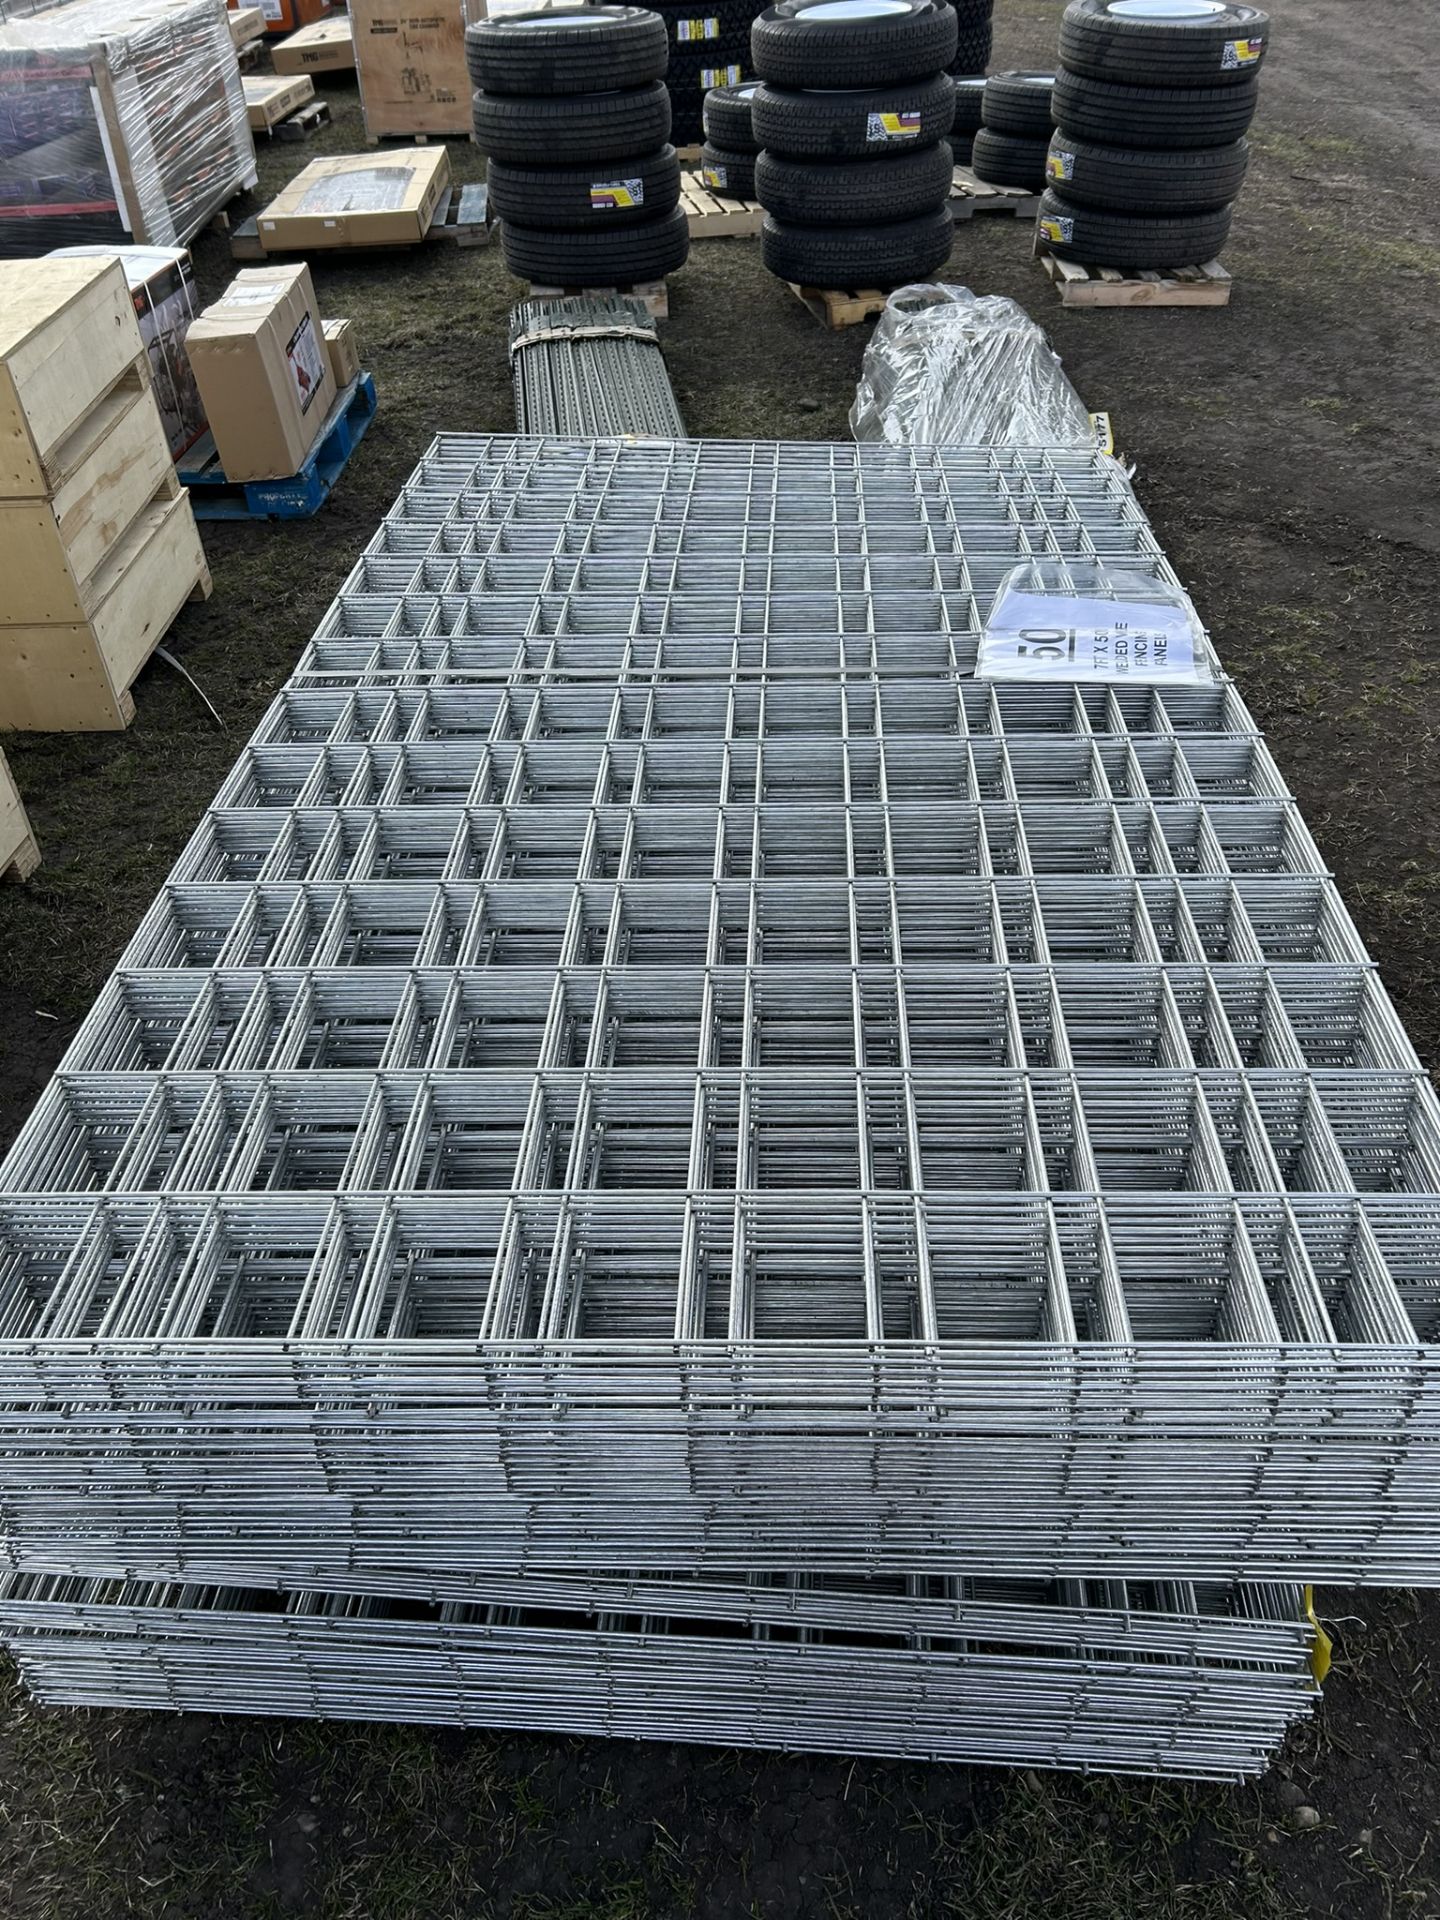 L/O - 50 - 7'x50" WELD WIRE FENCING PANELS - Image 2 of 3